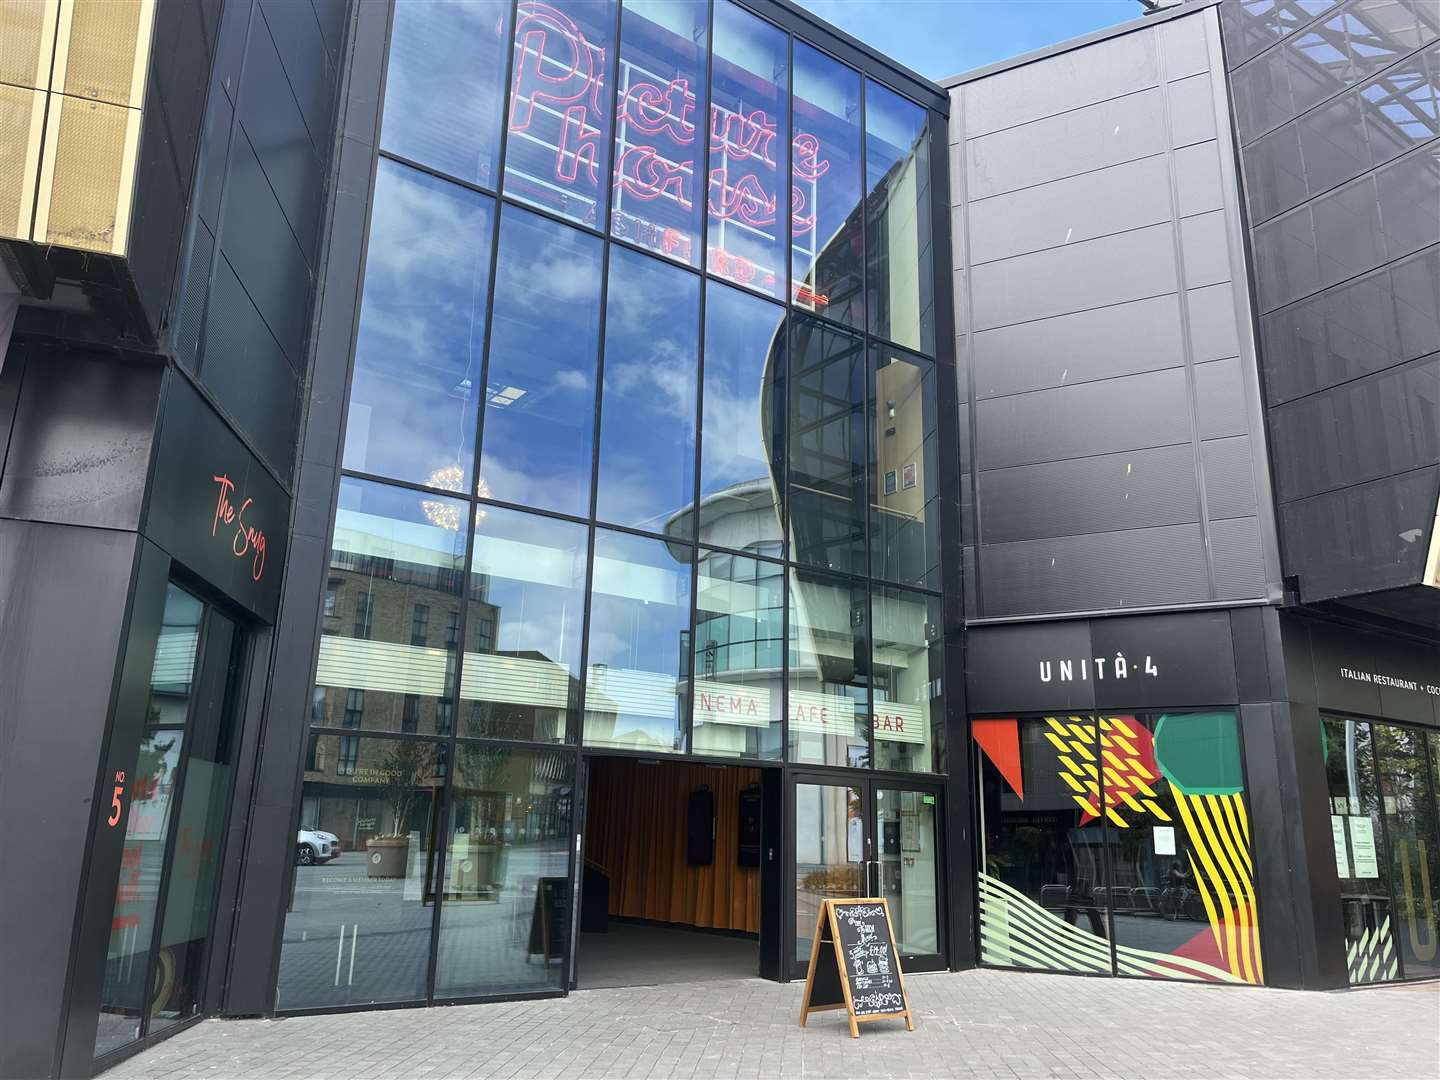 Picturehouse in Ashford opened in 2018